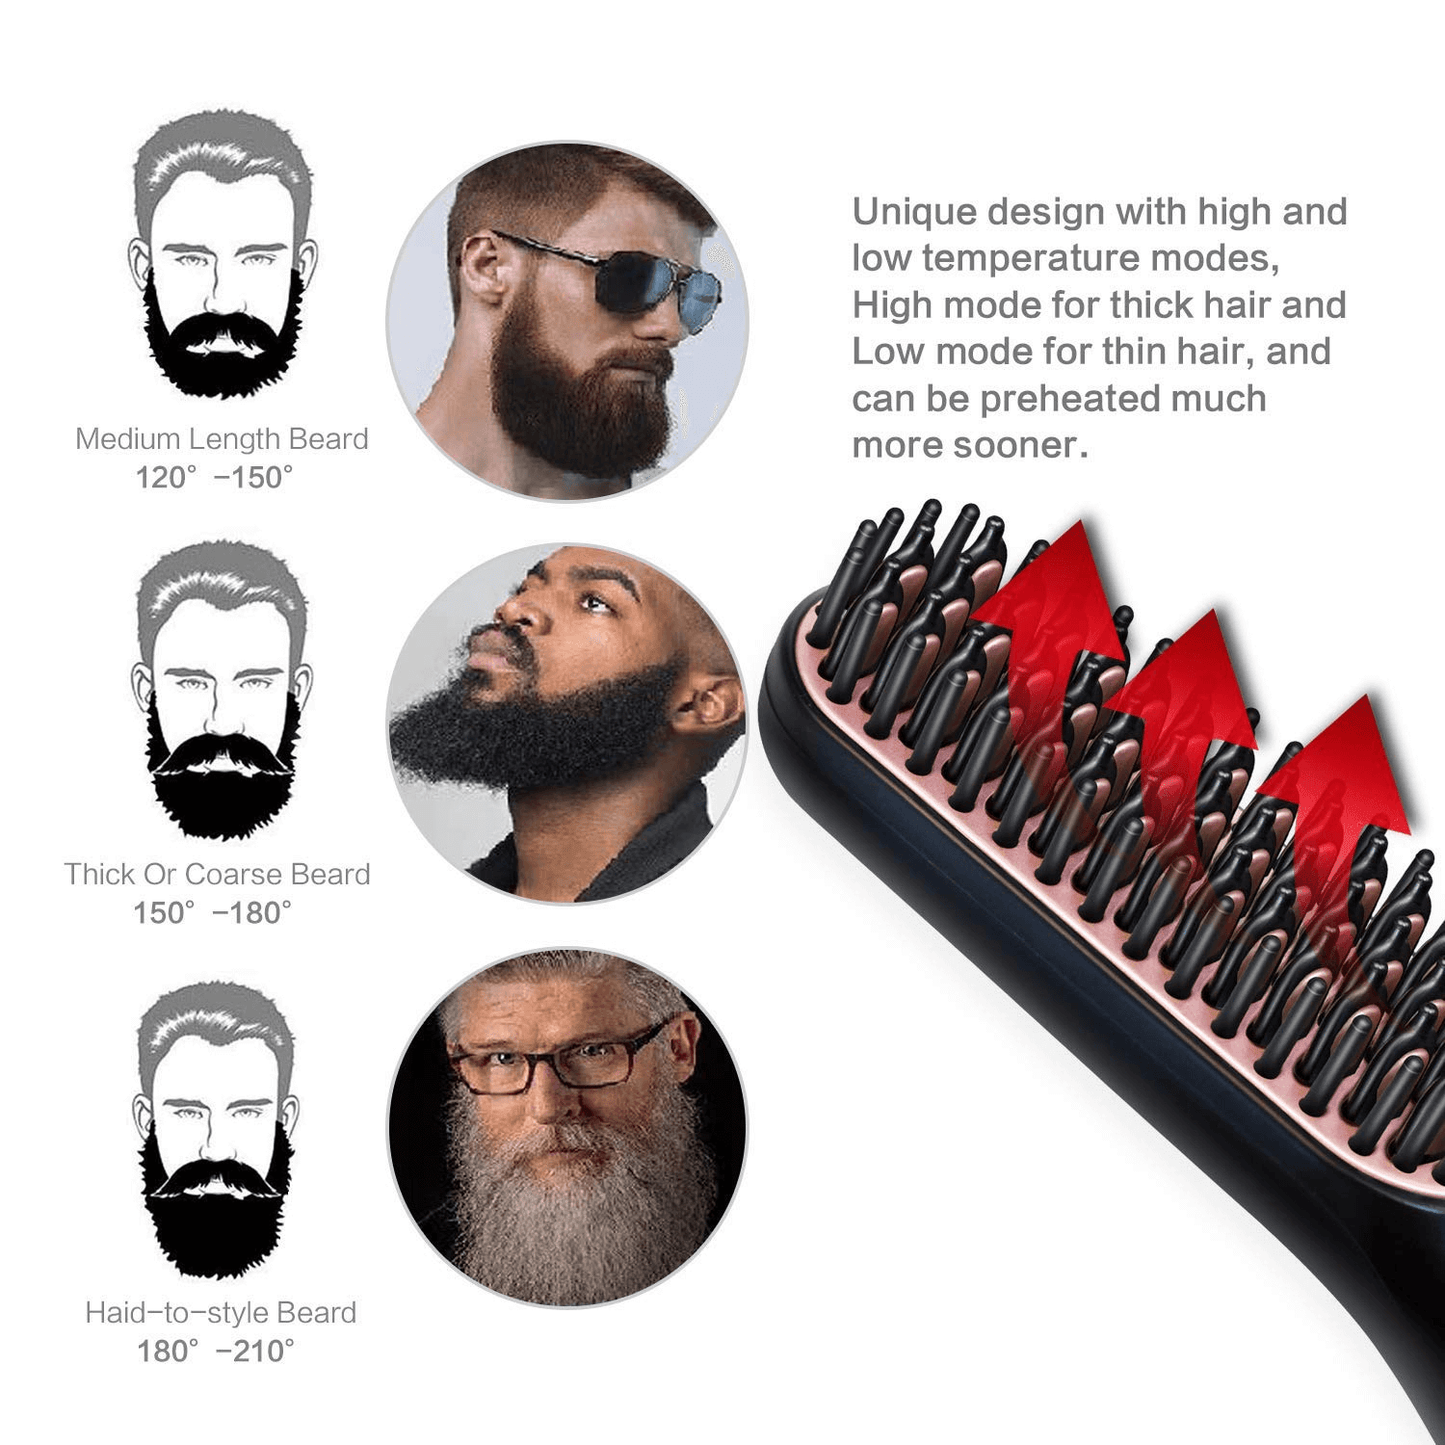 How To Use Electric Straightener For Beard And Hair